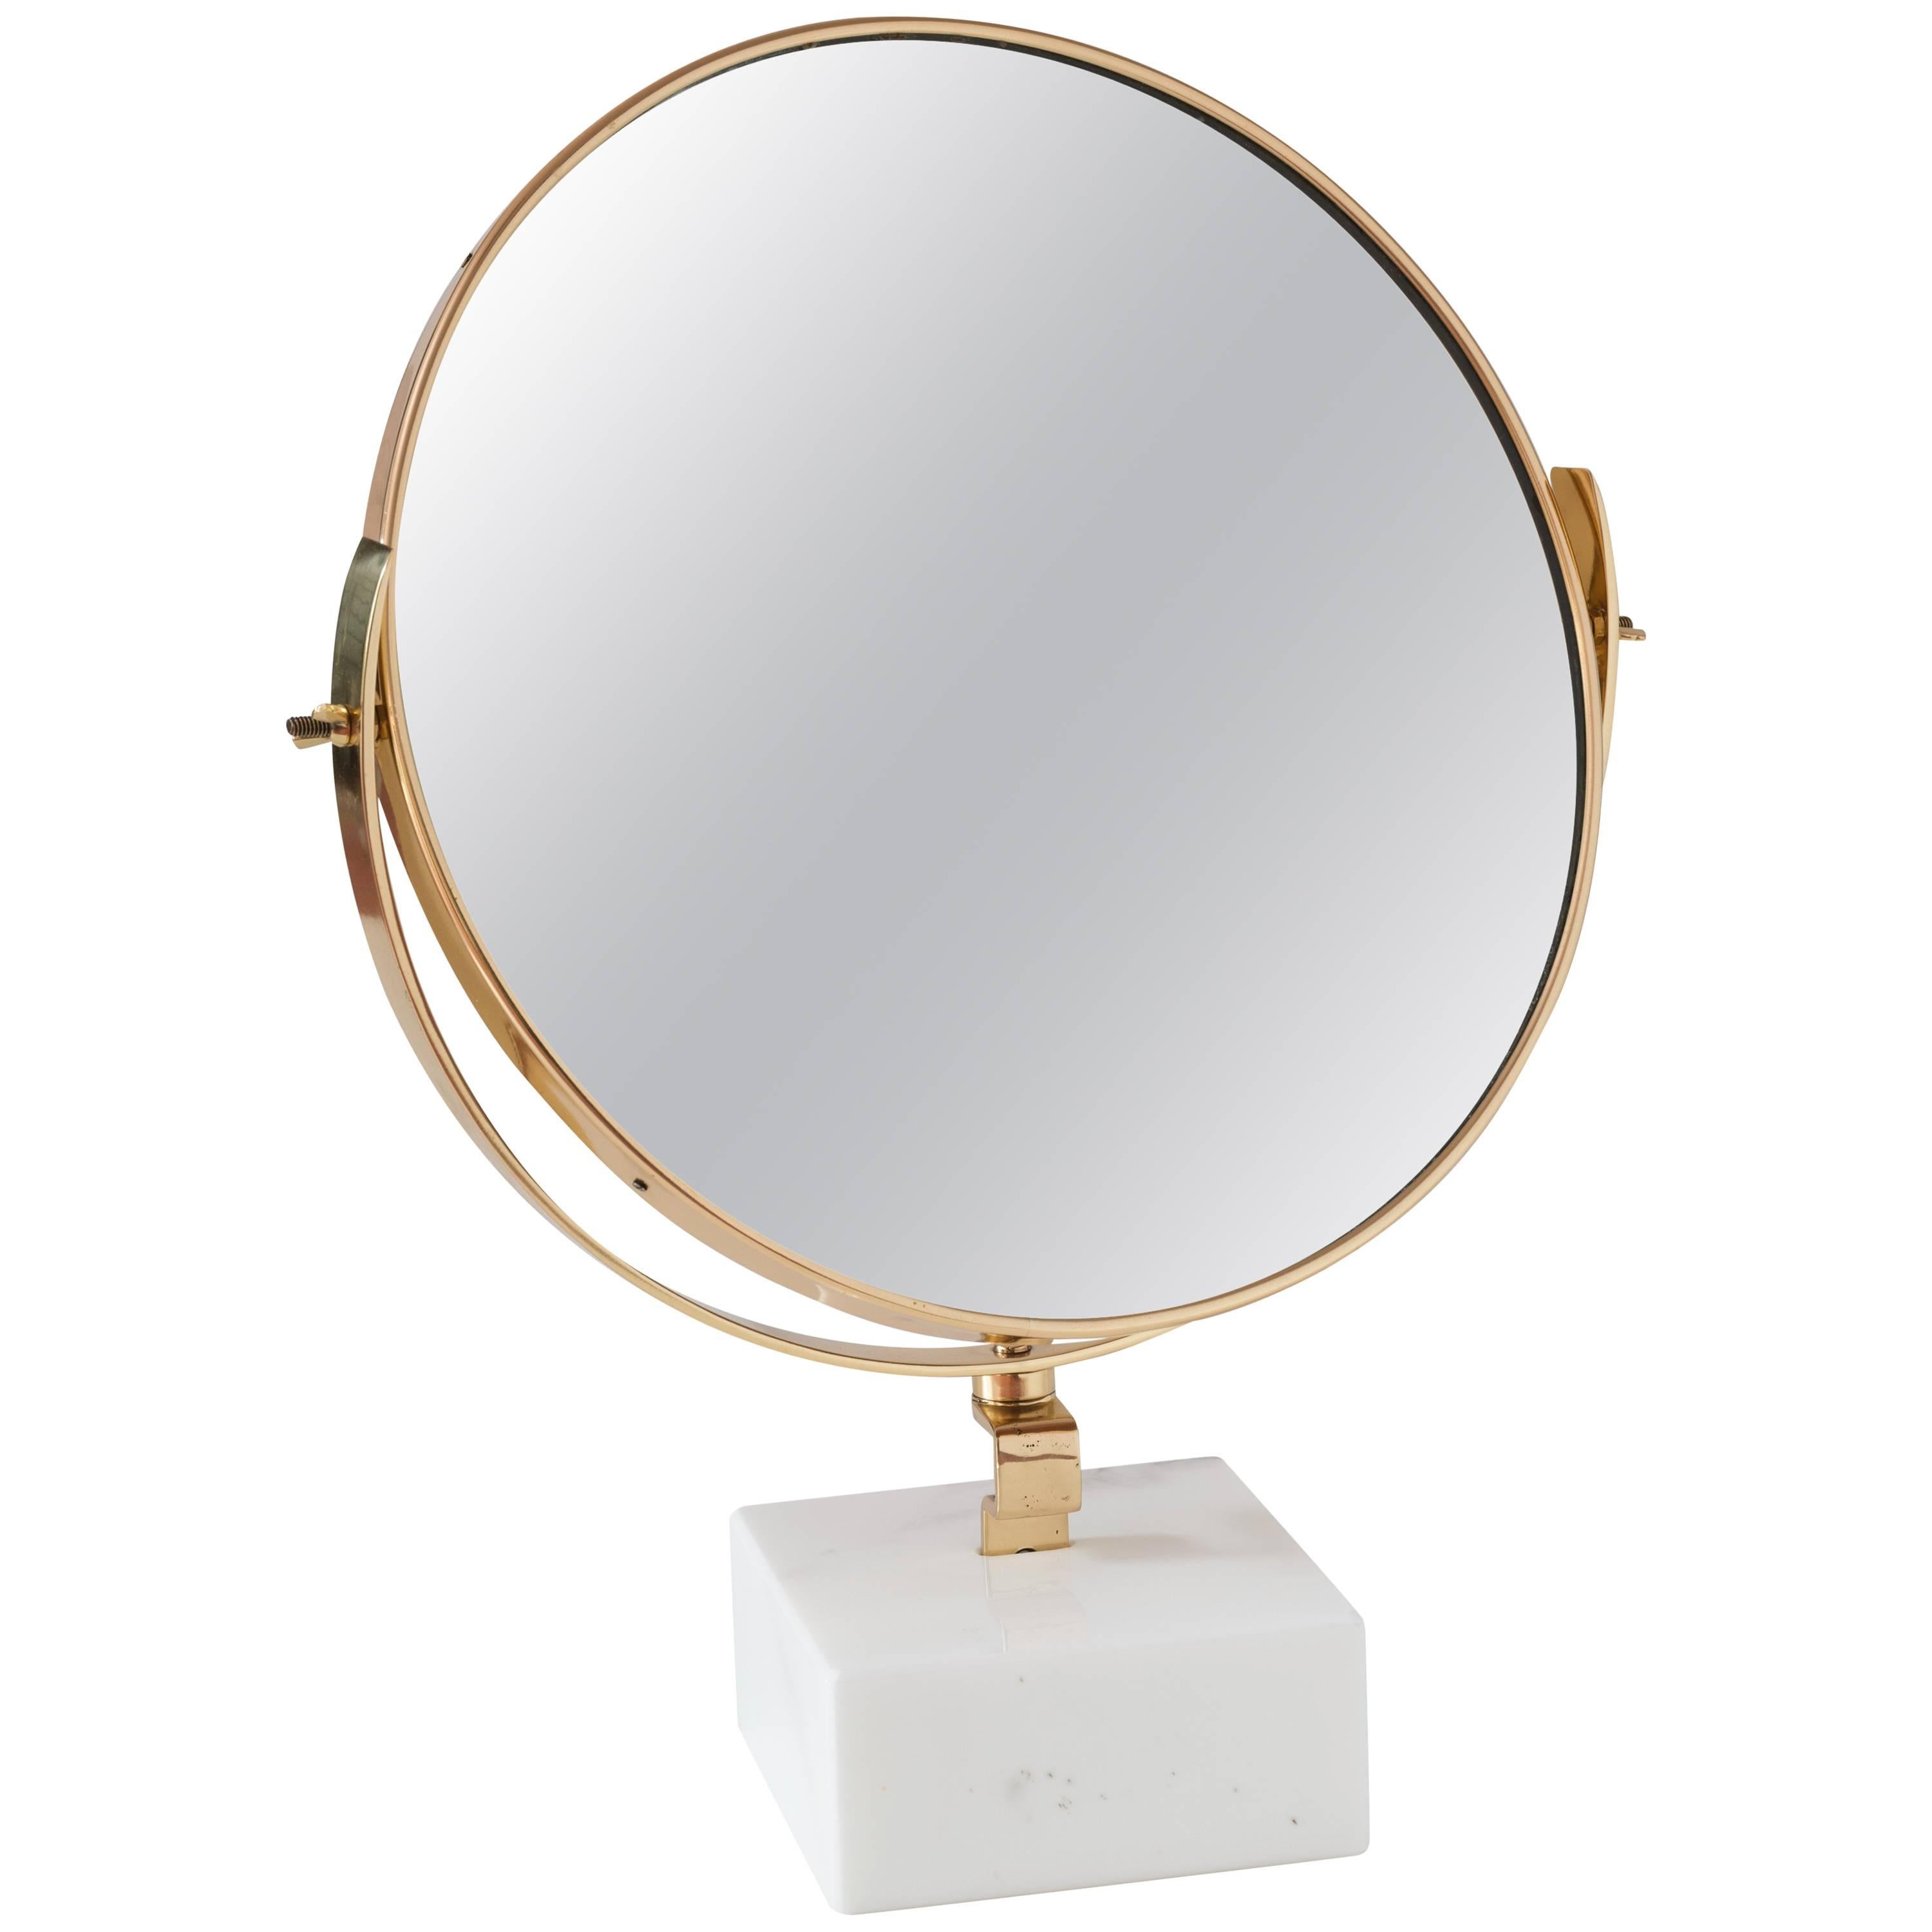 Vanity mirror designed by Gio Ponti for the vanity of Hotel Royal, Napoli, 1955 and produced by Fontana Arte in 1955. 
limited editon
Original piece customized by CG with marble support in 2016. 
The Gio Ponti vanity was produced by Giordano